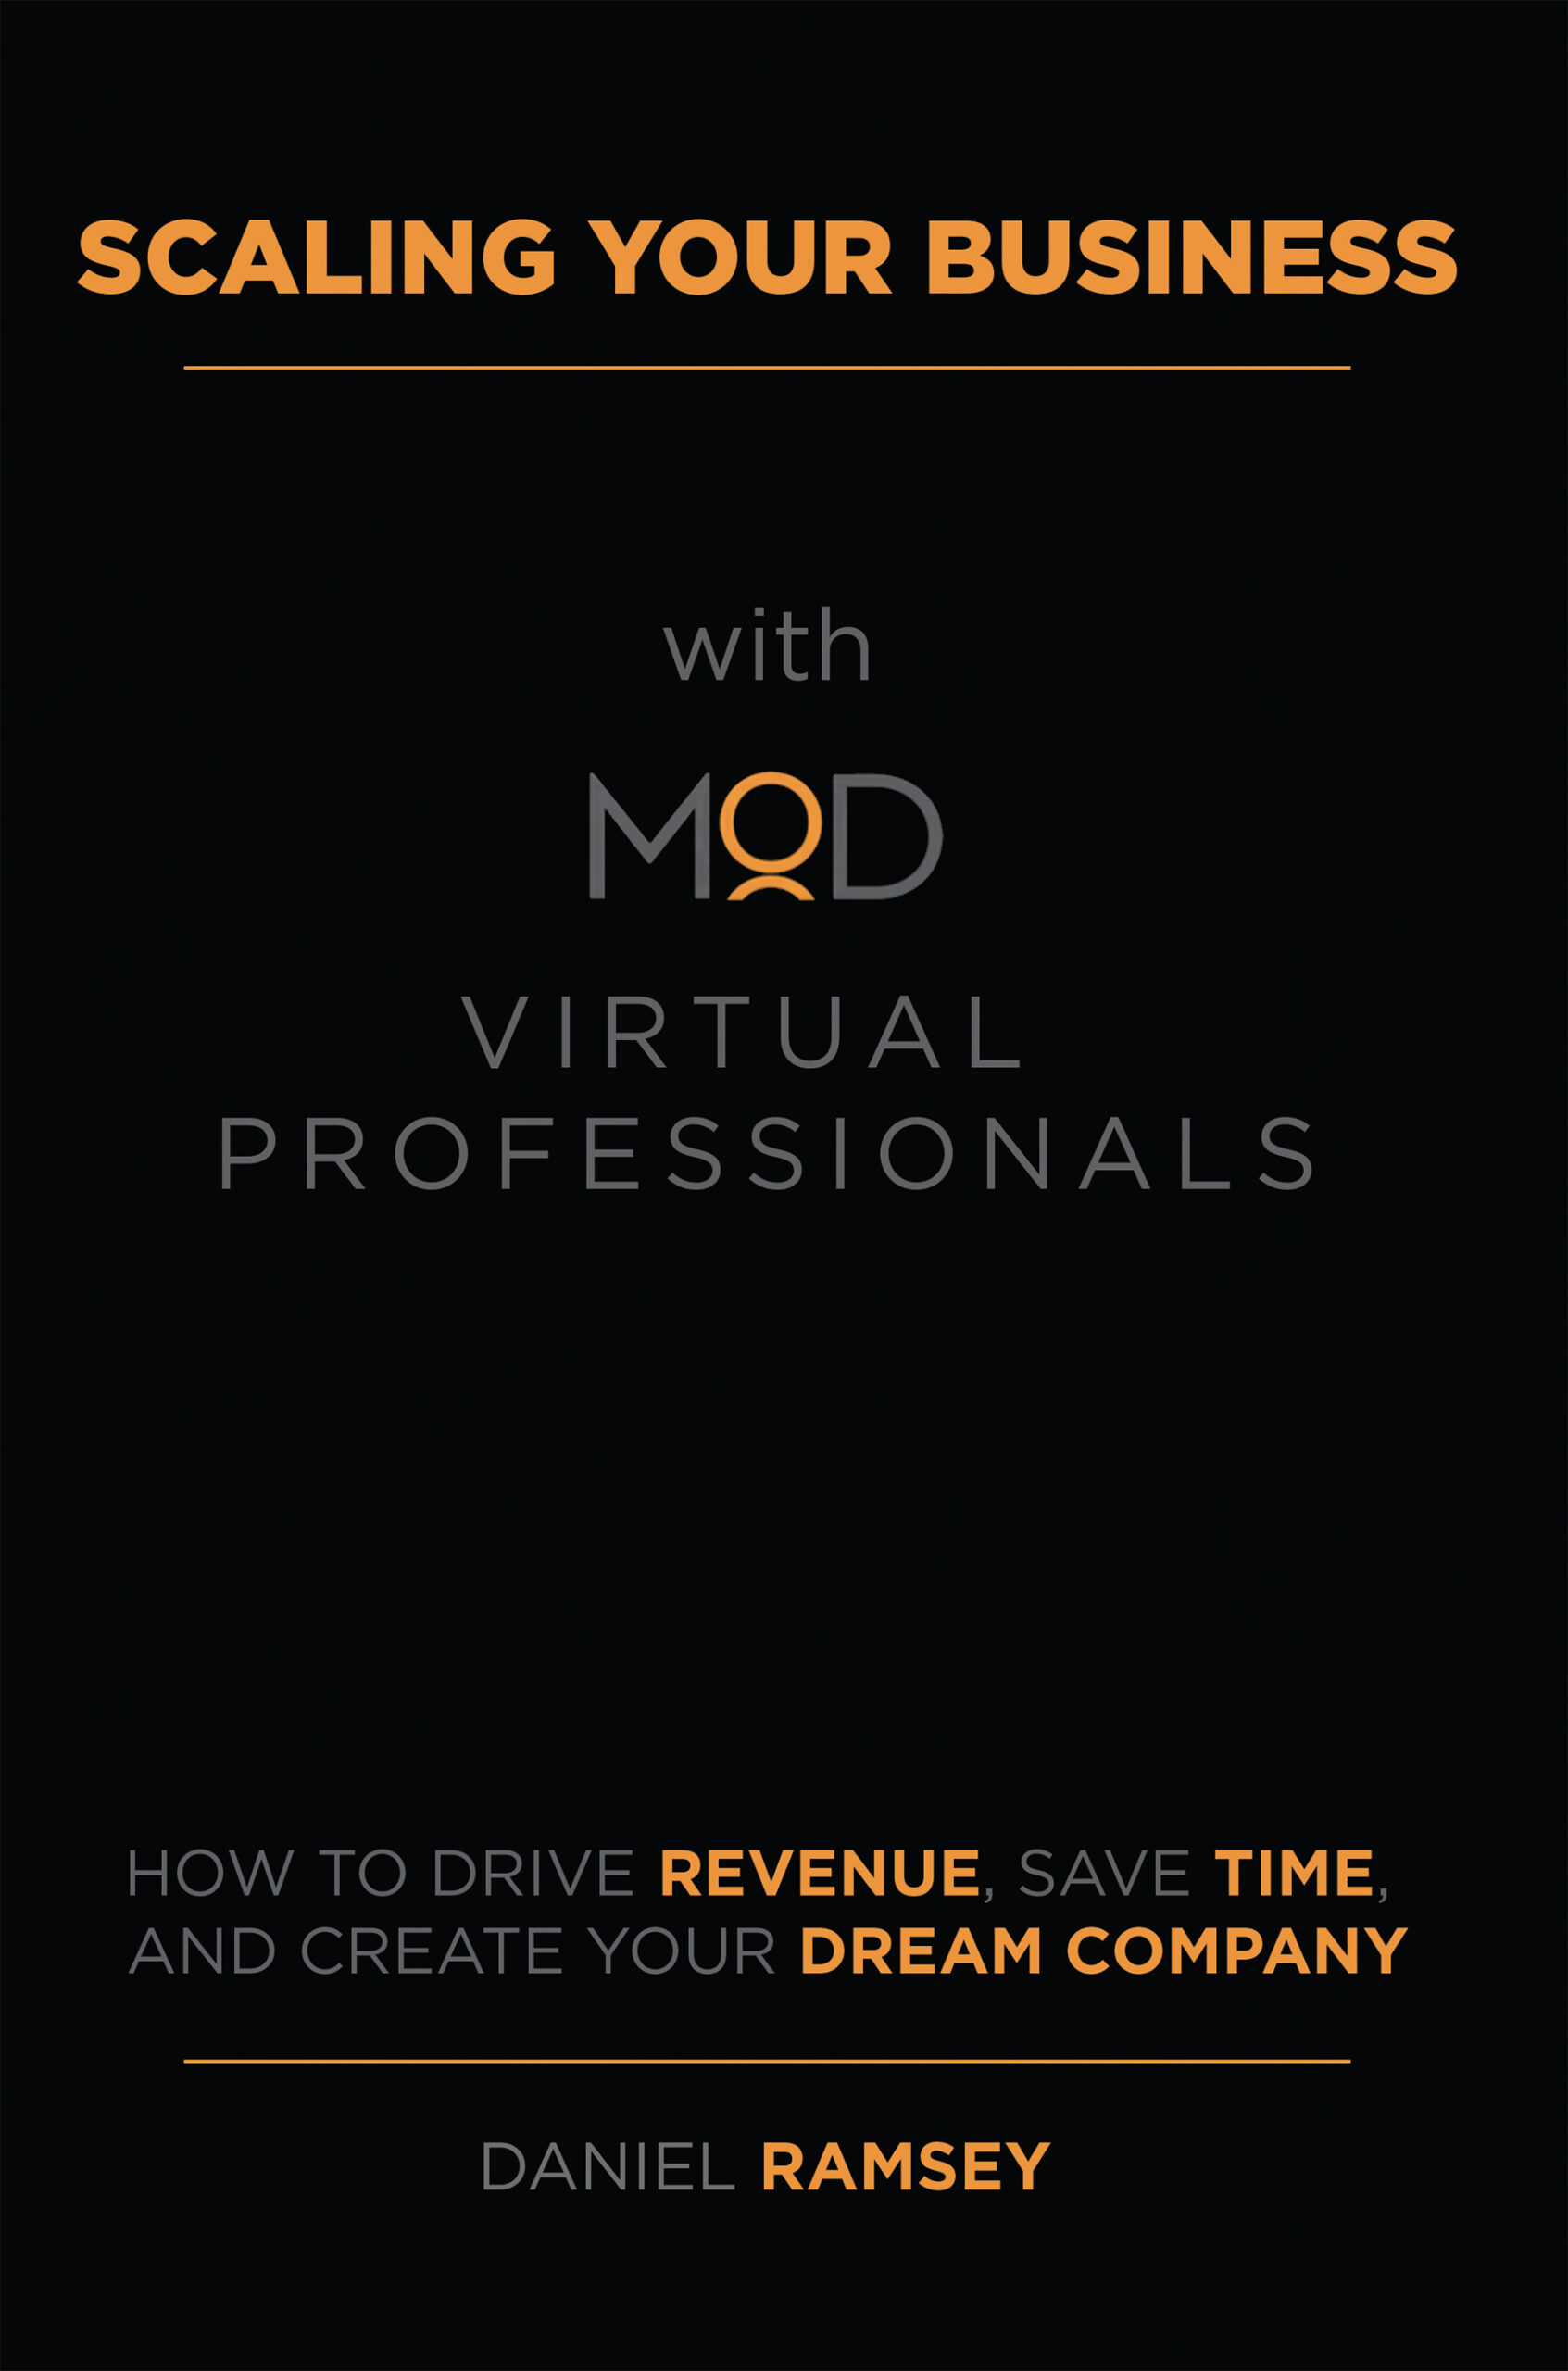 FREE: Scaling Your Business with MOD Virtual Professionals: How to Drive Revenue, Save Time, and Create Your Dream Company by Daniel Ramsey